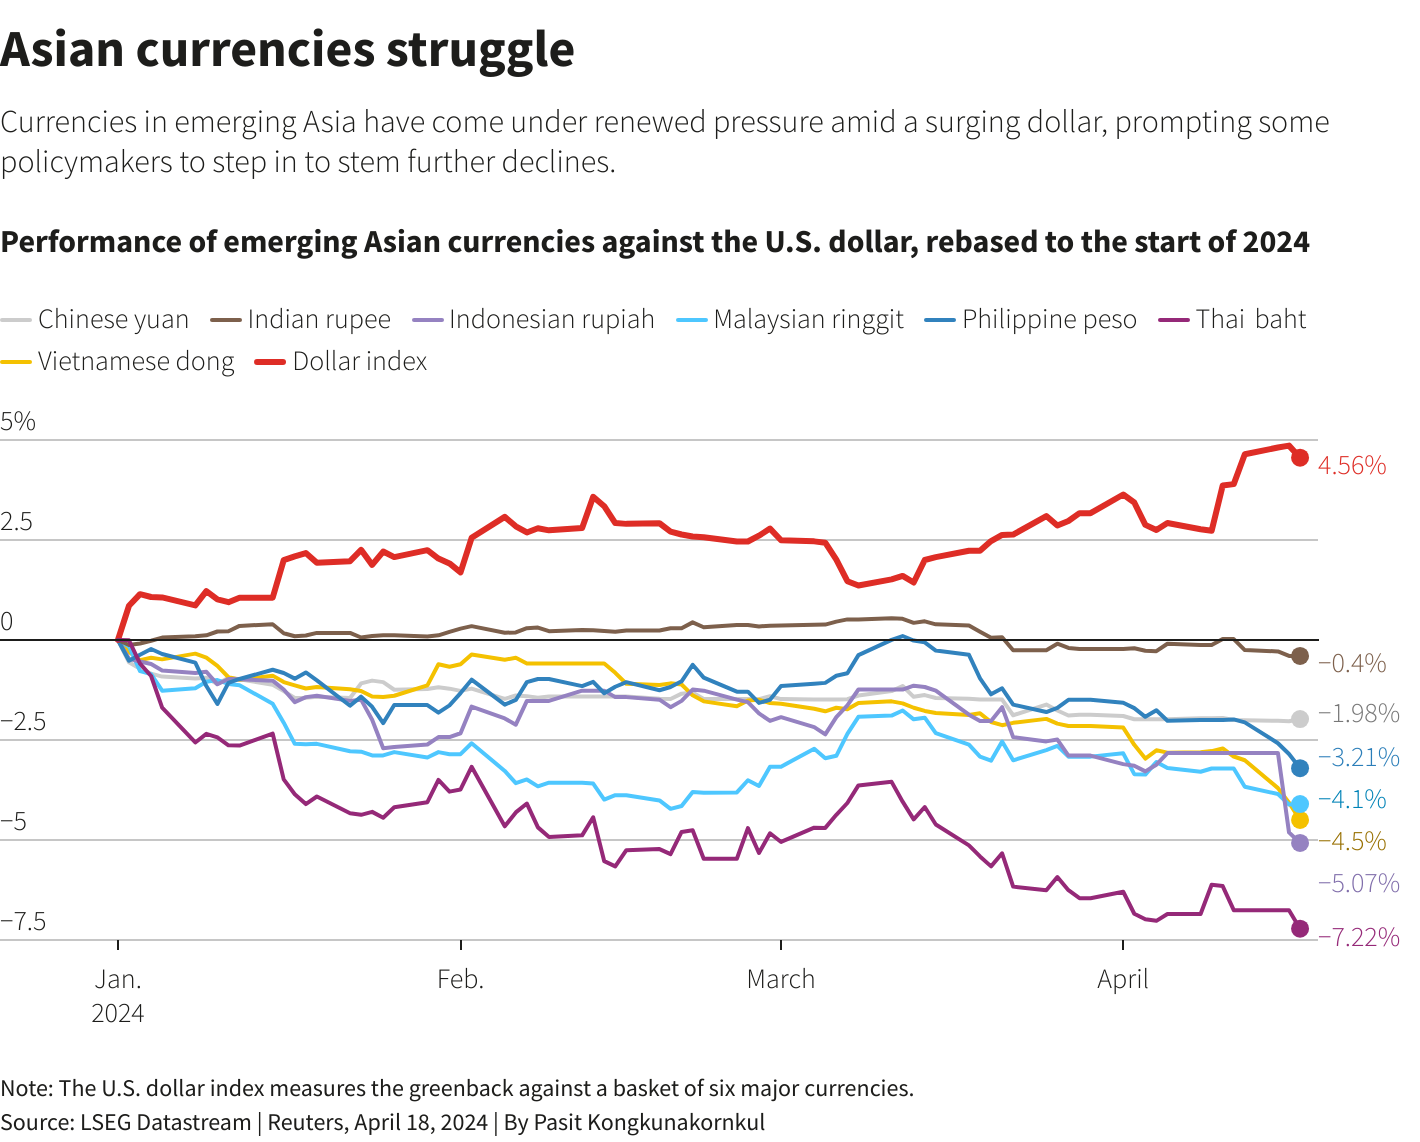 Chart showing Asian currencies struggle